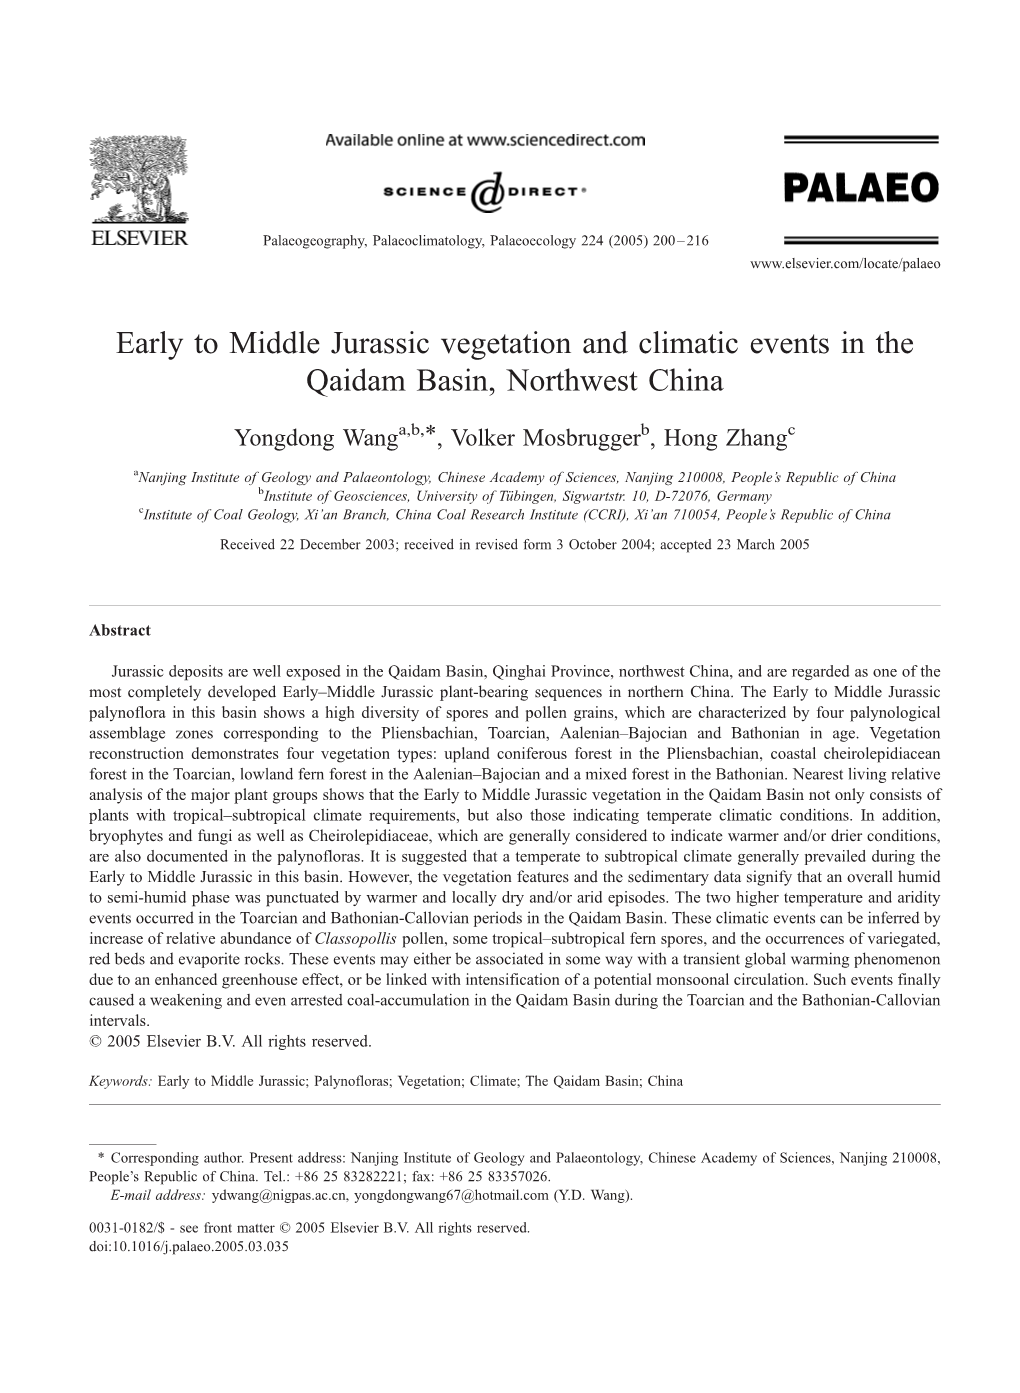 Early to Middle Jurassic Vegetation and Climatic Events in the Qaidam Basin, Northwest China